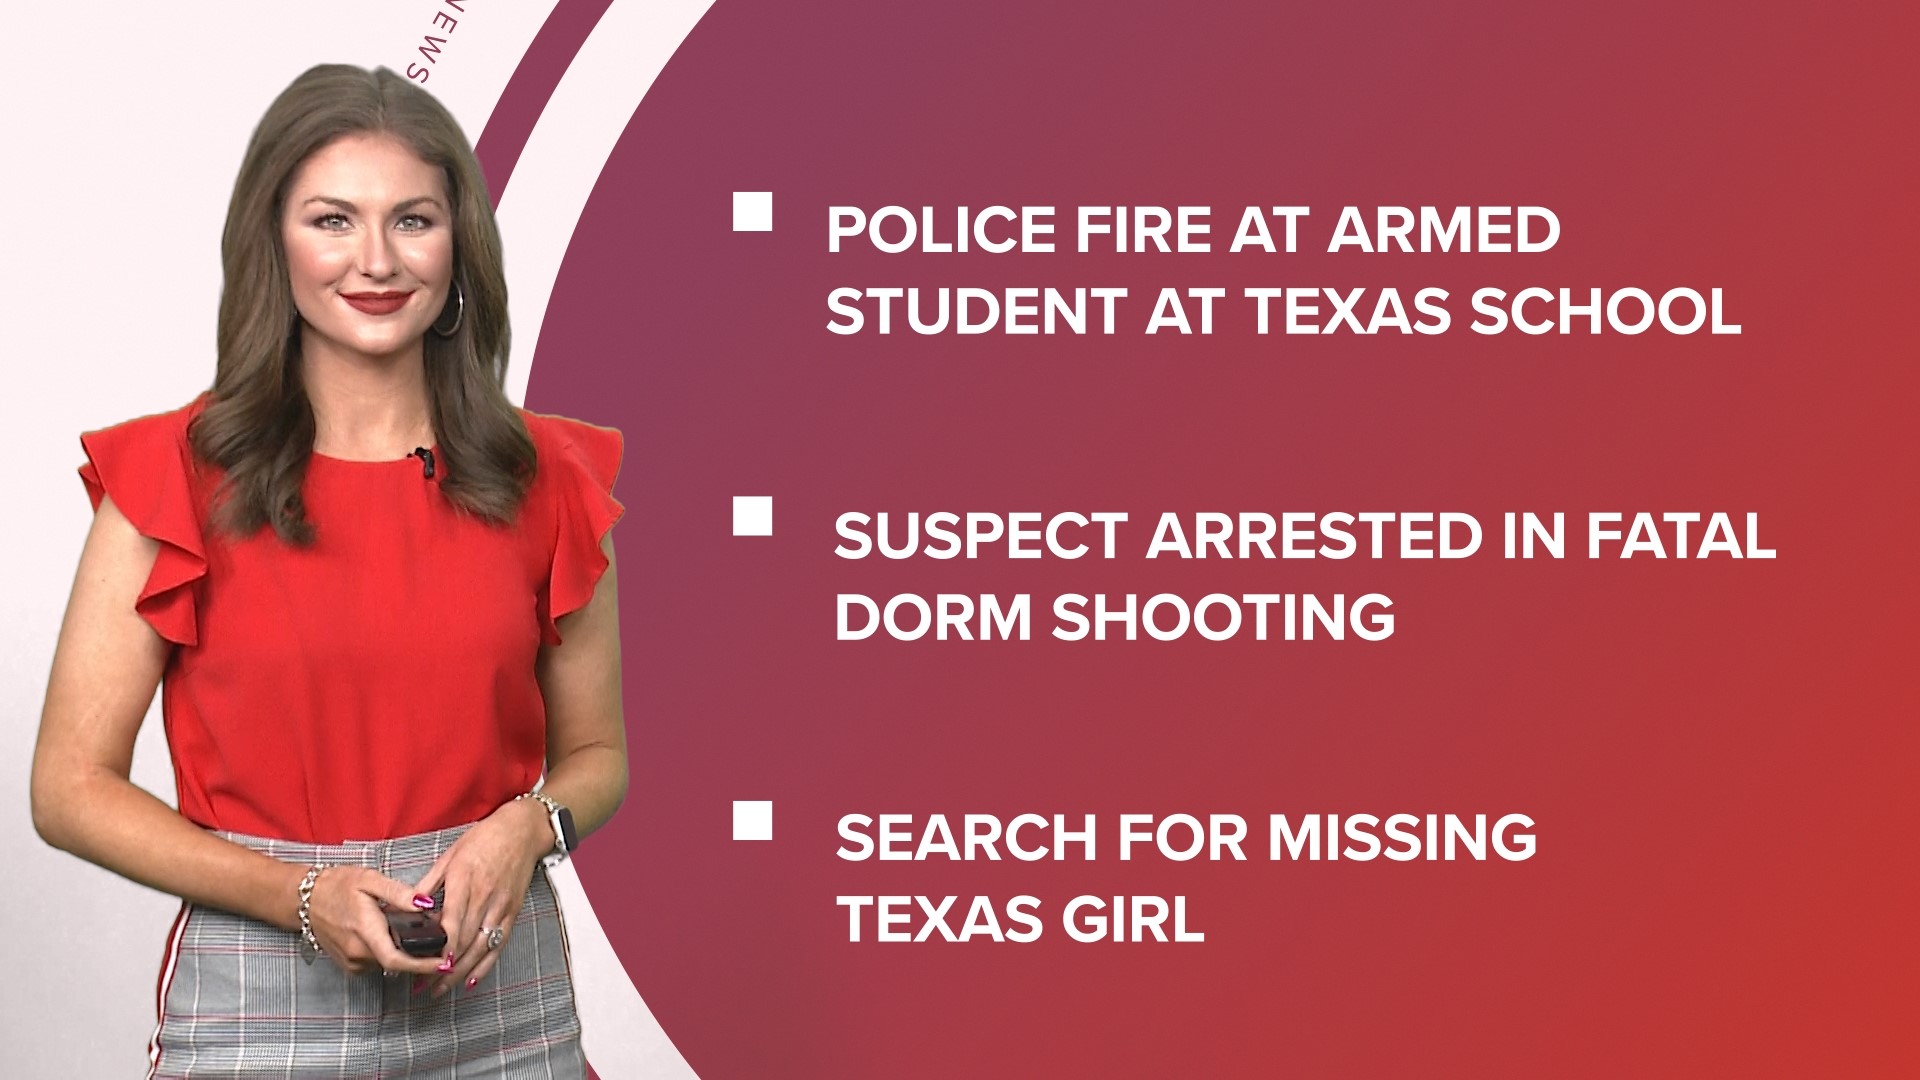 A look at what is happening in the news from police firing at an armed student at a Texas school to flooding in California and Capital One to buy Discover.